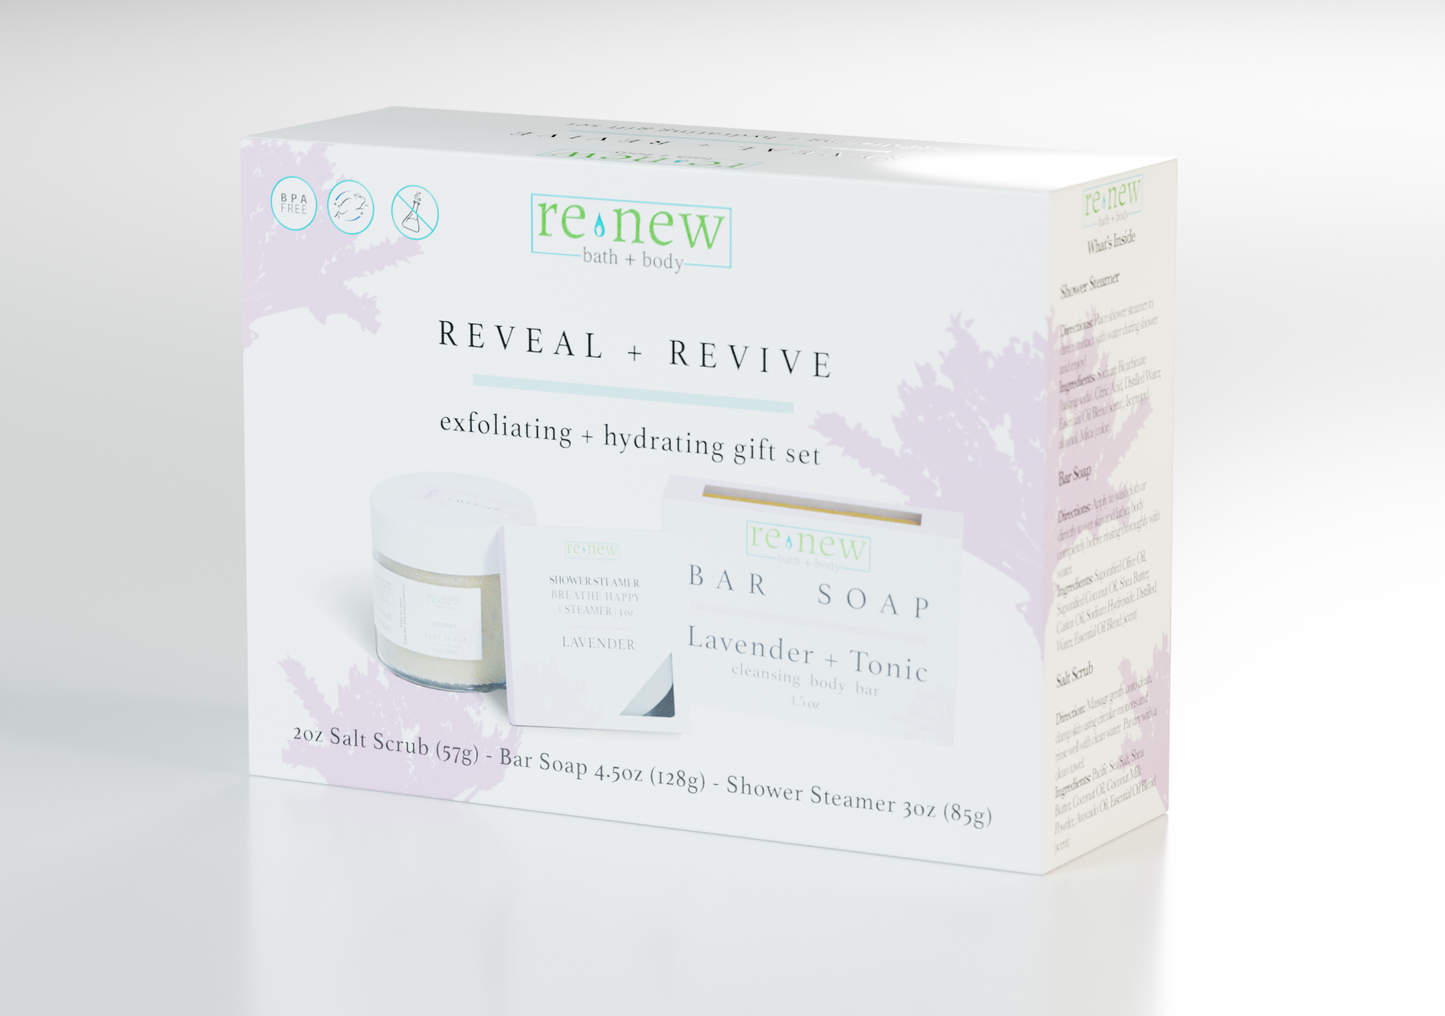 Reveal + Revive Exfoliating + Hydrating Gift Set